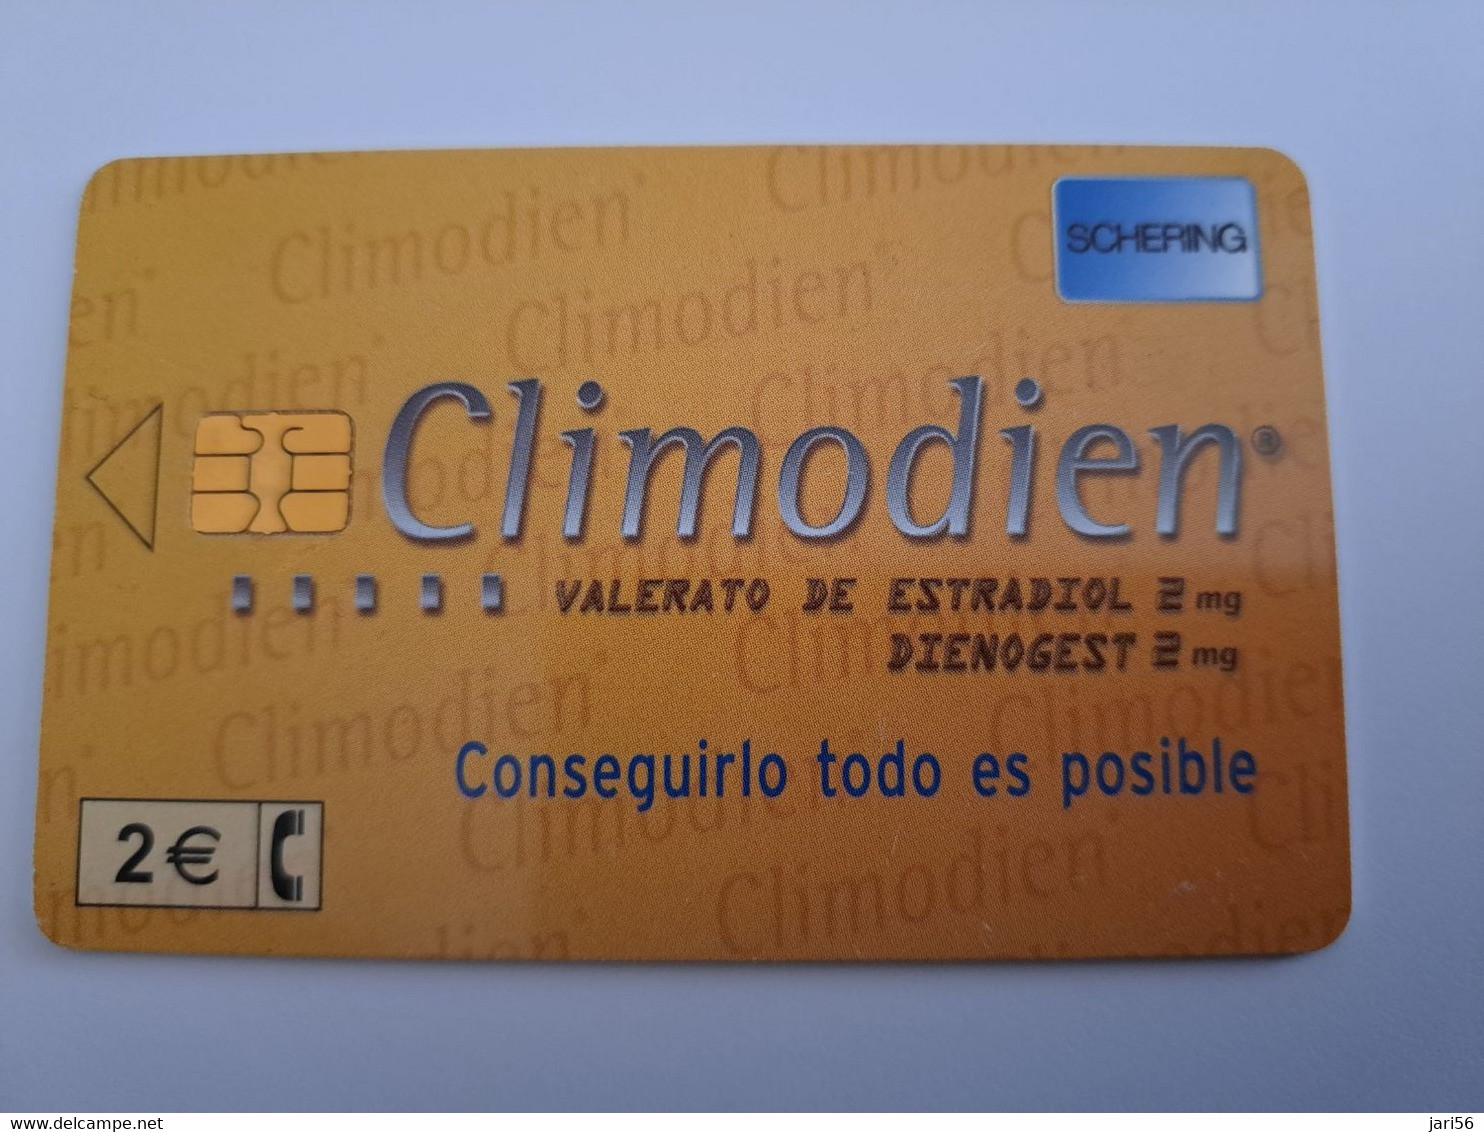 SPAIN/ ESPANA   2 €  CLIMODIEN    Fine Used  CHIP CARD  **12017** - Private Issues